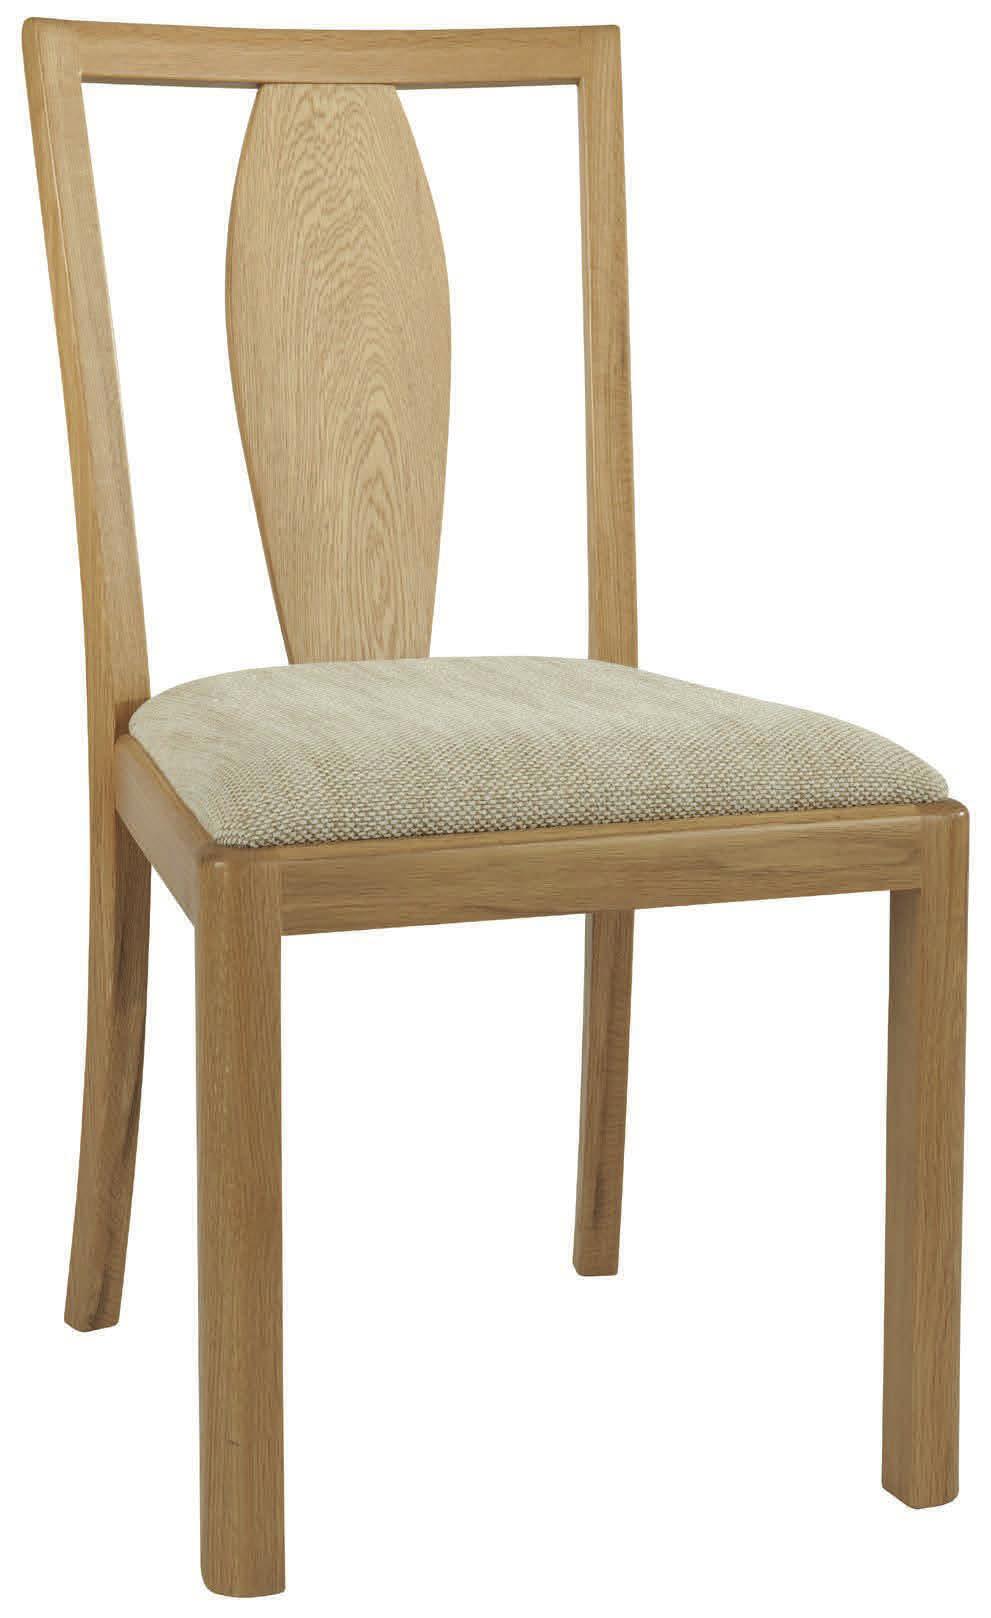 FABRIC SEAT Width 50cm - (19 2 /3 ) Depth 56cm - (21 1 /2 ) Height 90cm - (35 1 /2 ) WOODEN BACK CHAIR WITH TAUPE FAUX LEATHER